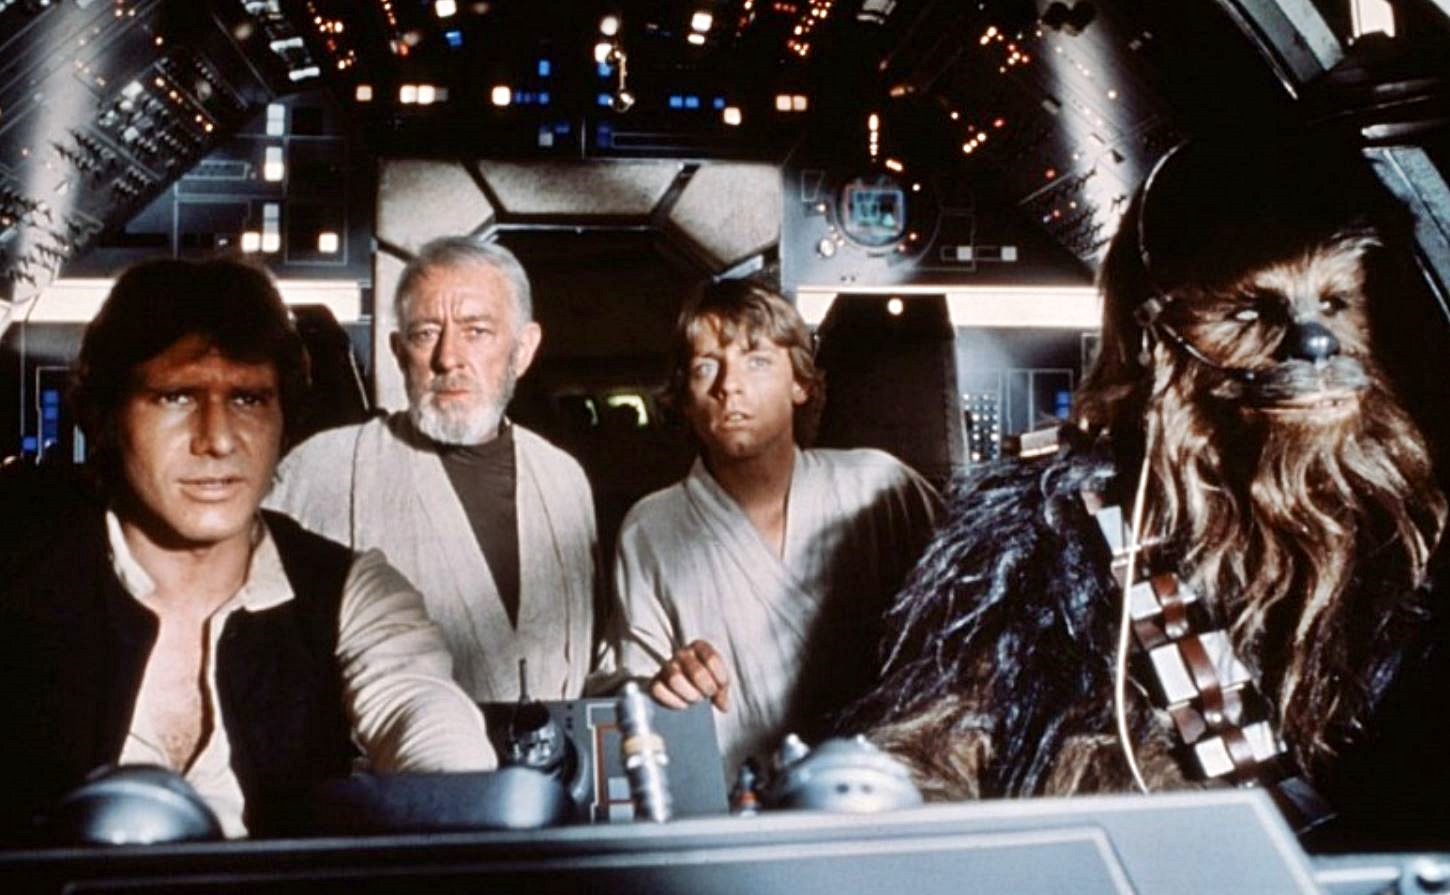 This 24-Question All-Rounded “True or False” Quiz Will Determine If You Know Enough Star Wars Episode IV: A New Hope